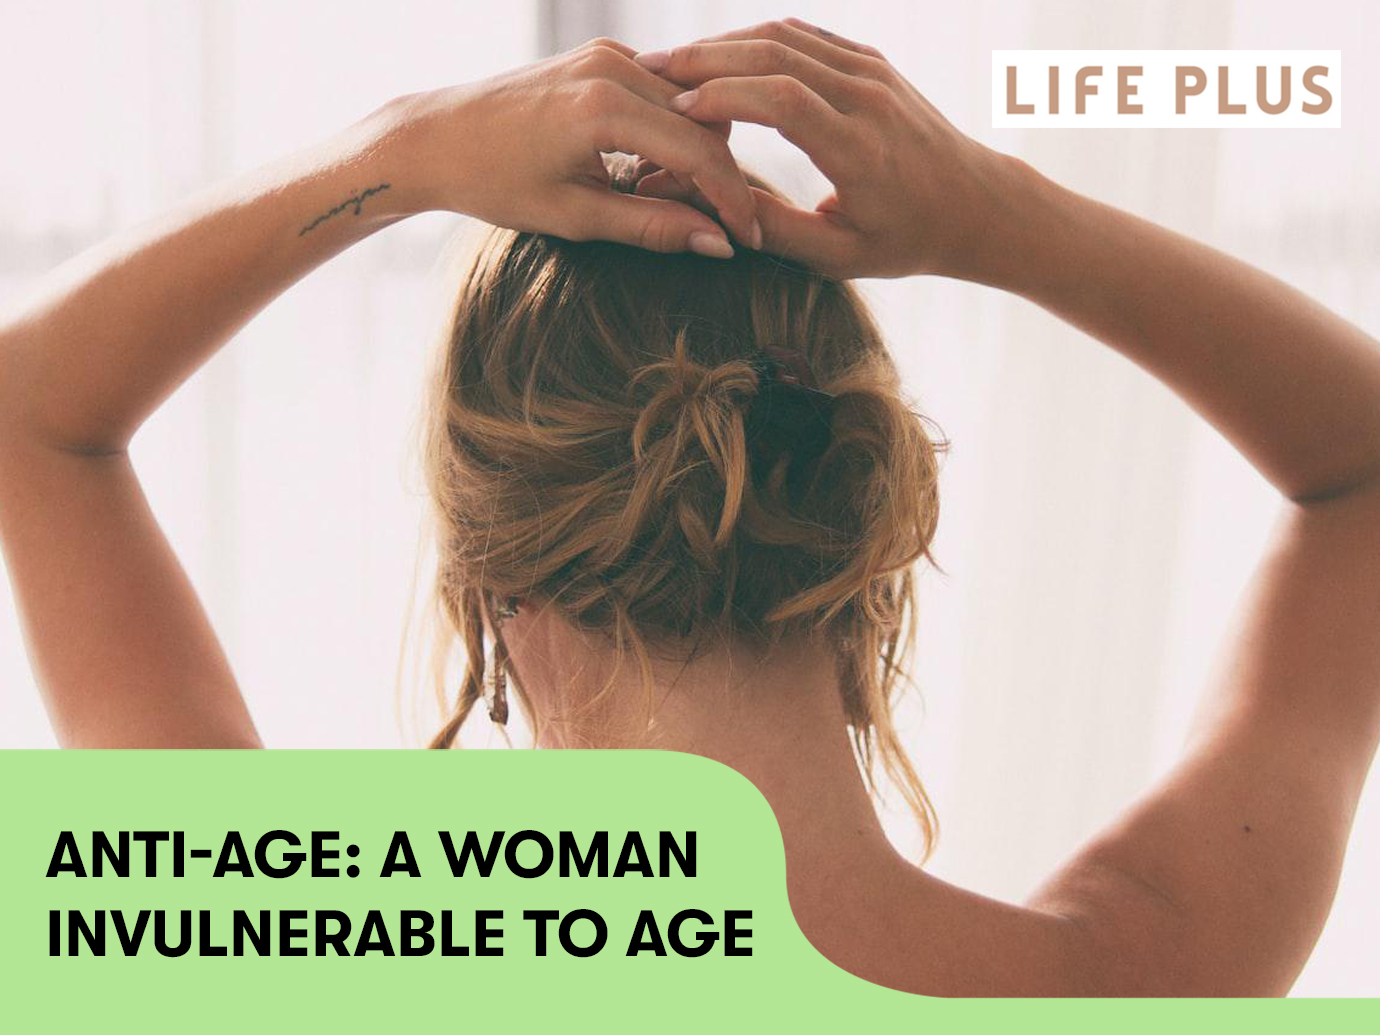 ANTI-AGE: A WOMAN INVULNERABLE TO AGE